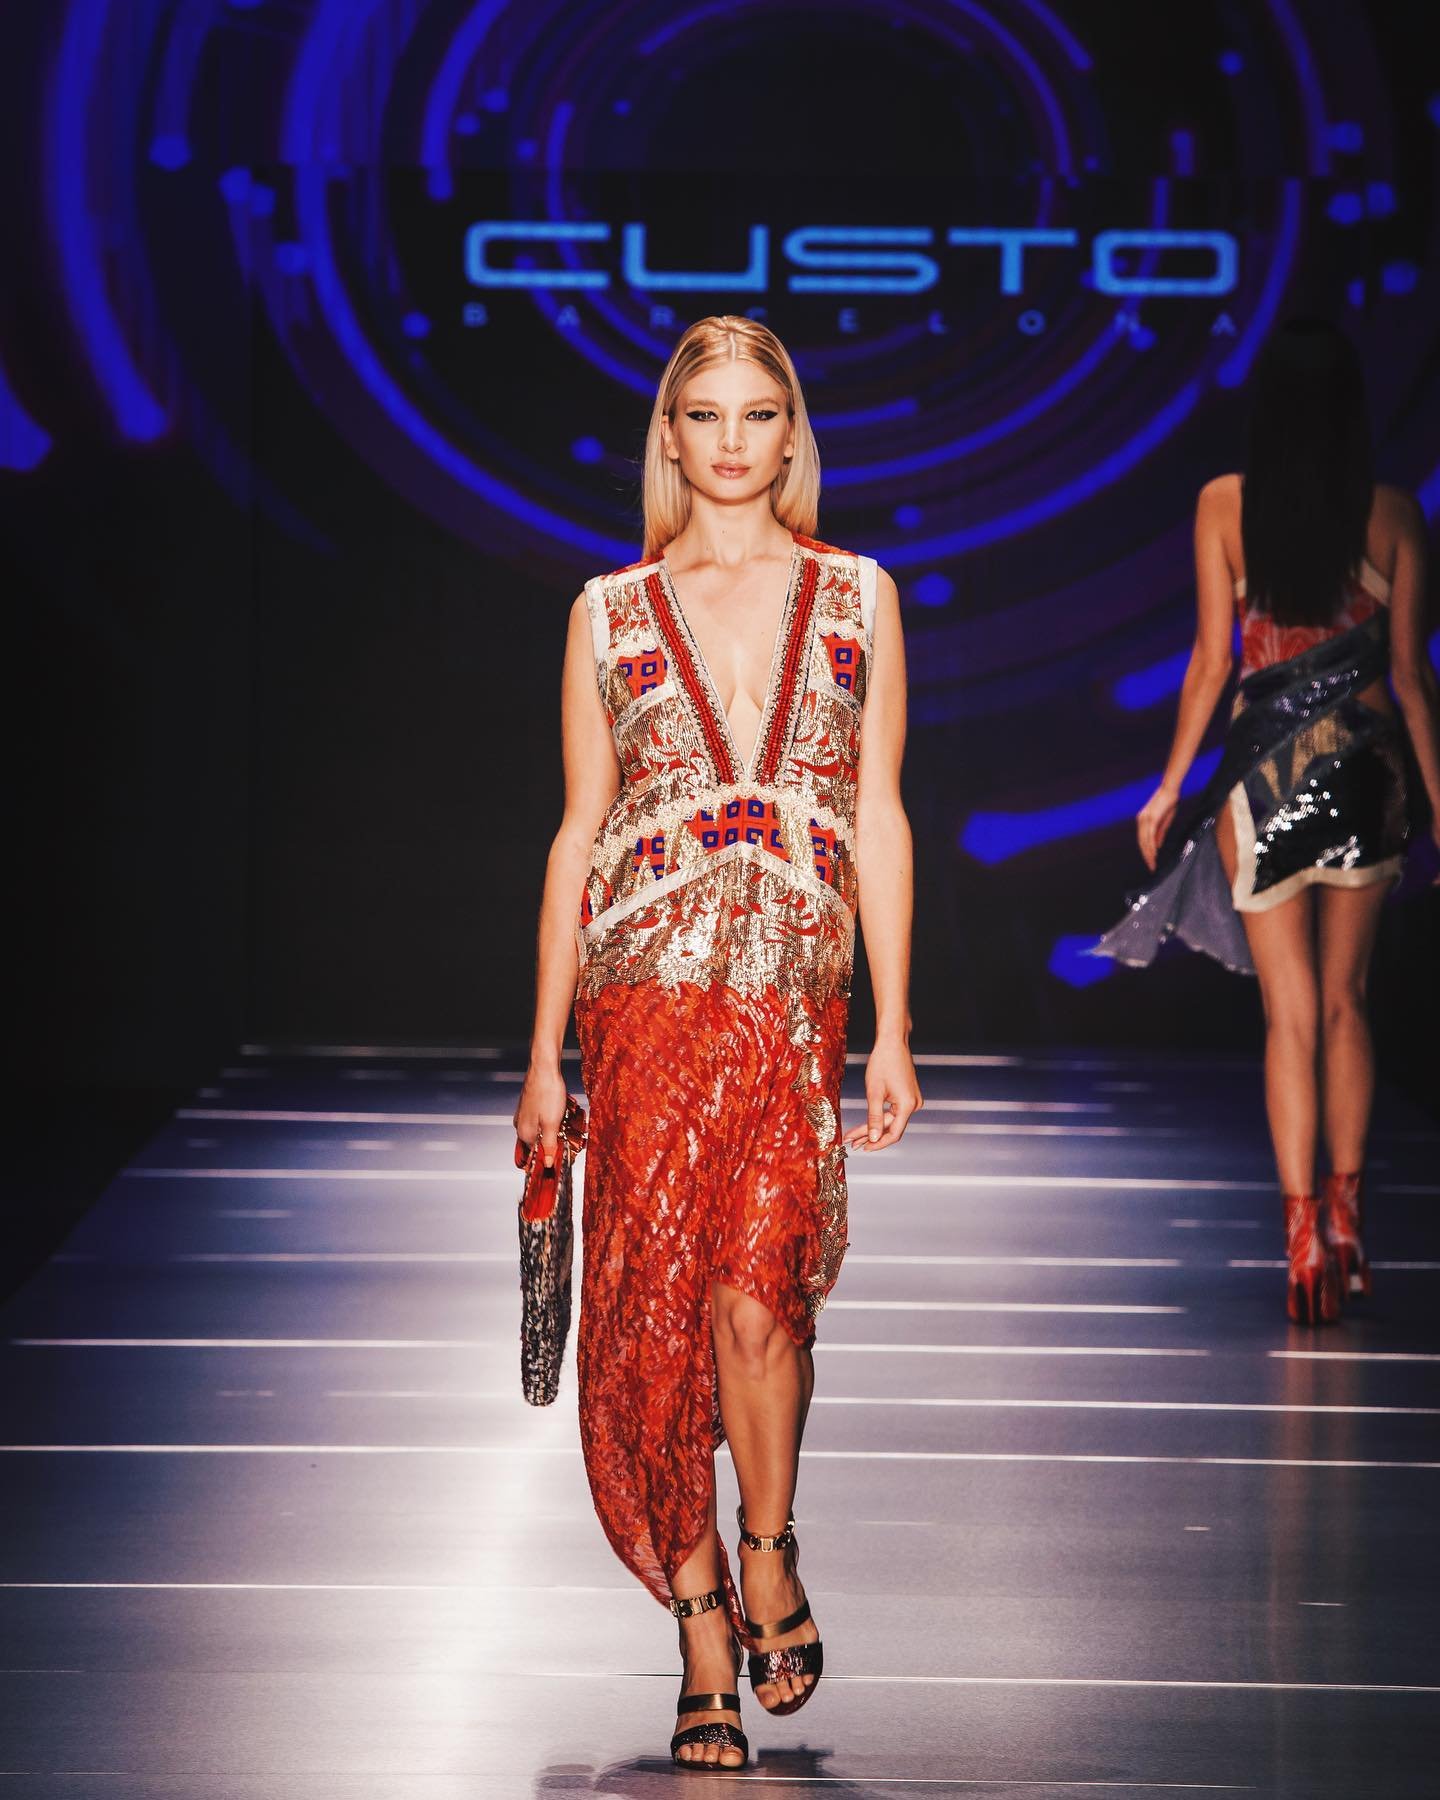 Miami Fashion Week® Returns With a Revamped and Live Edition